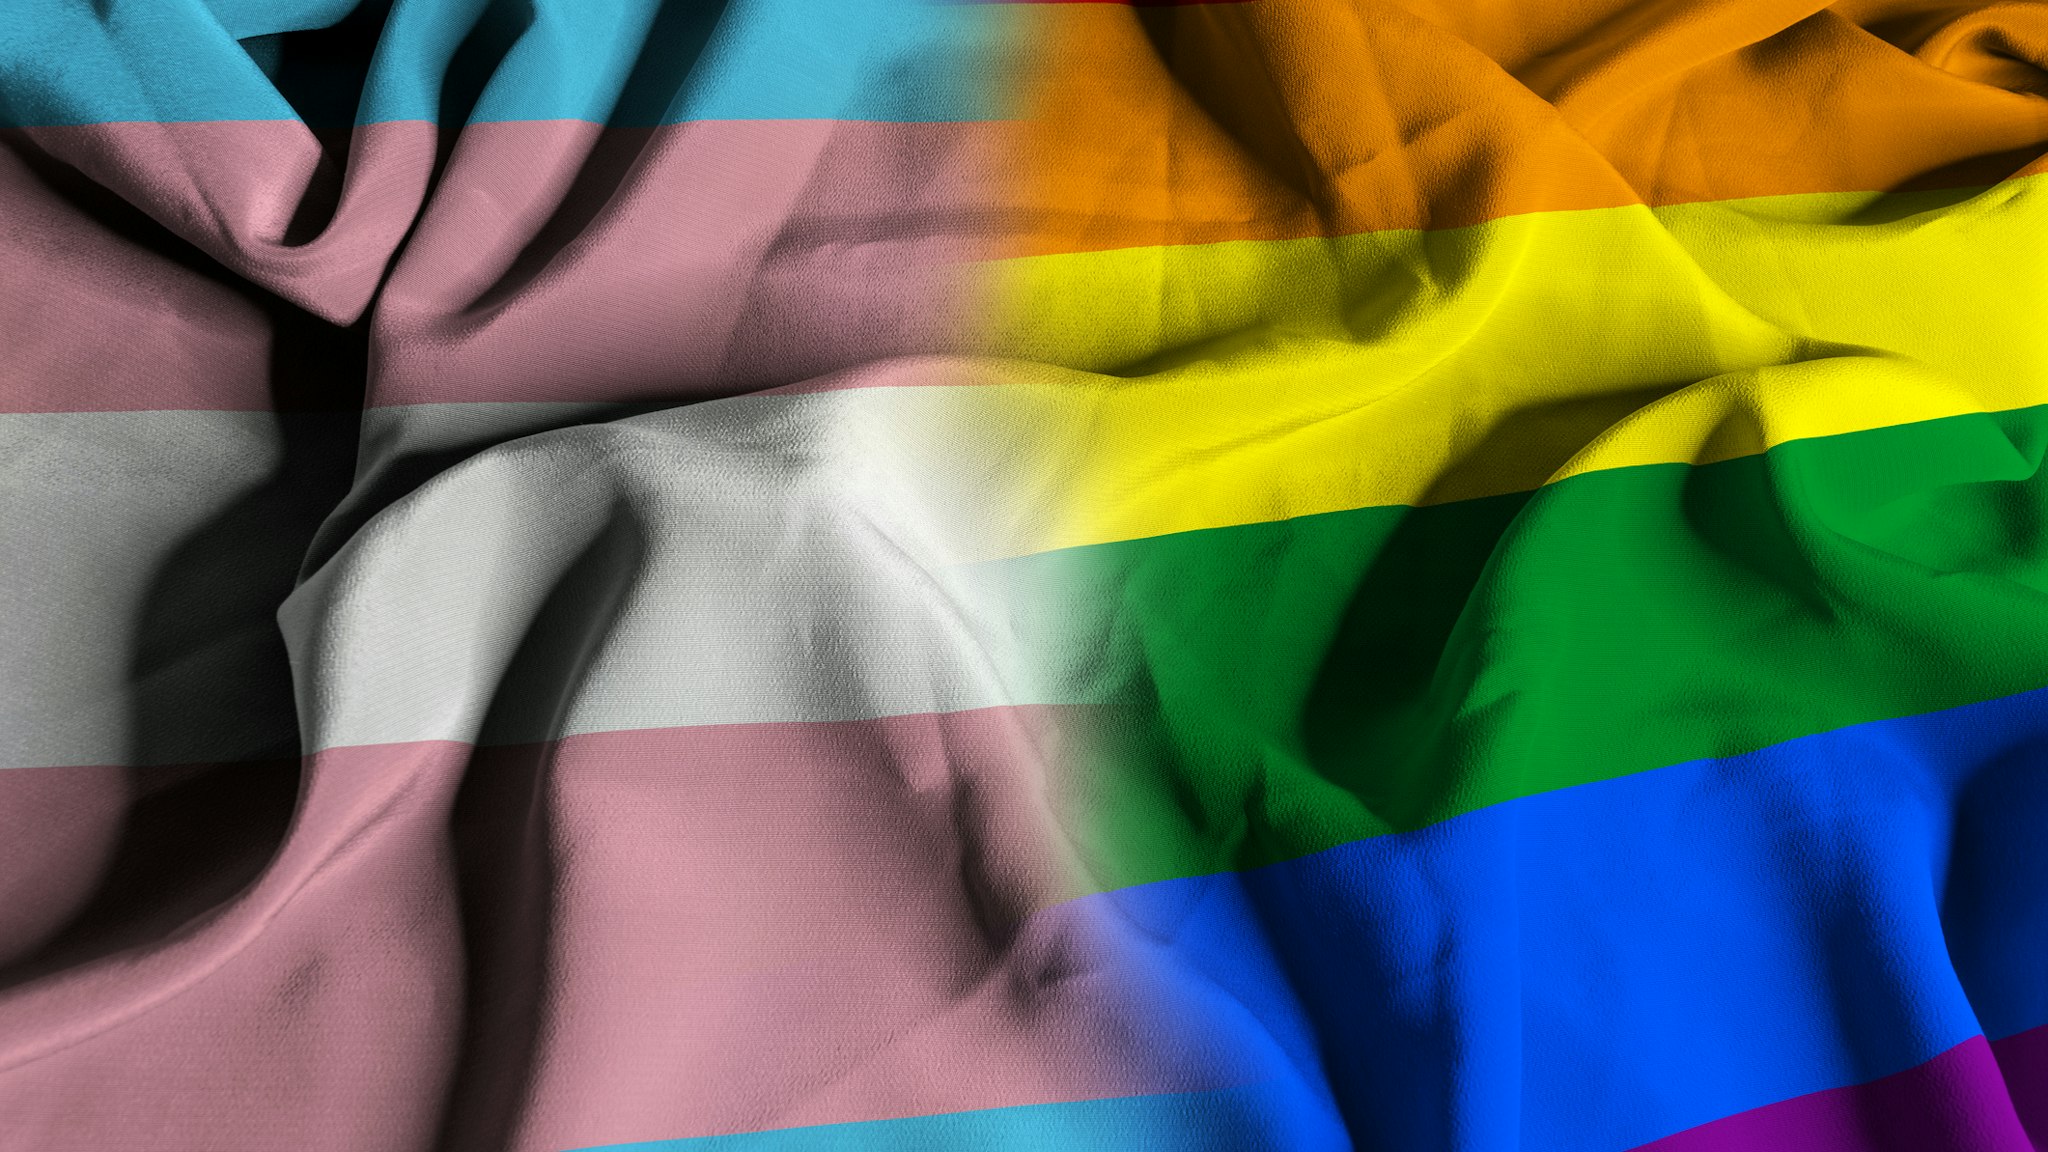 Flags of the Transgender Pride Movement and of the Lesbian, Gay, Bisexual, Transgender and Queer Pride and Social Movements